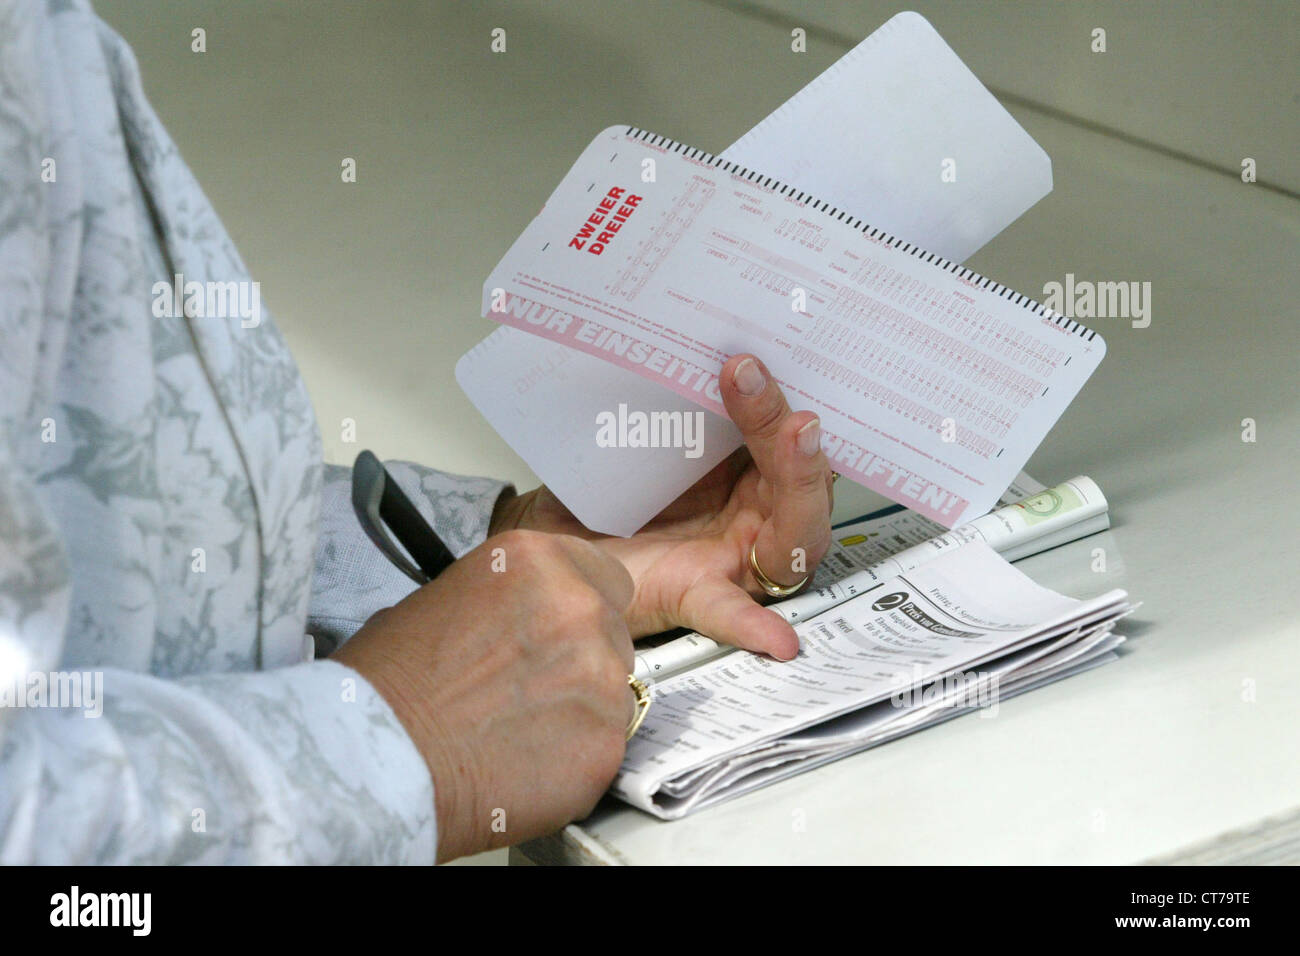 Symbol photo, players in completing a betting slip Stock Photo